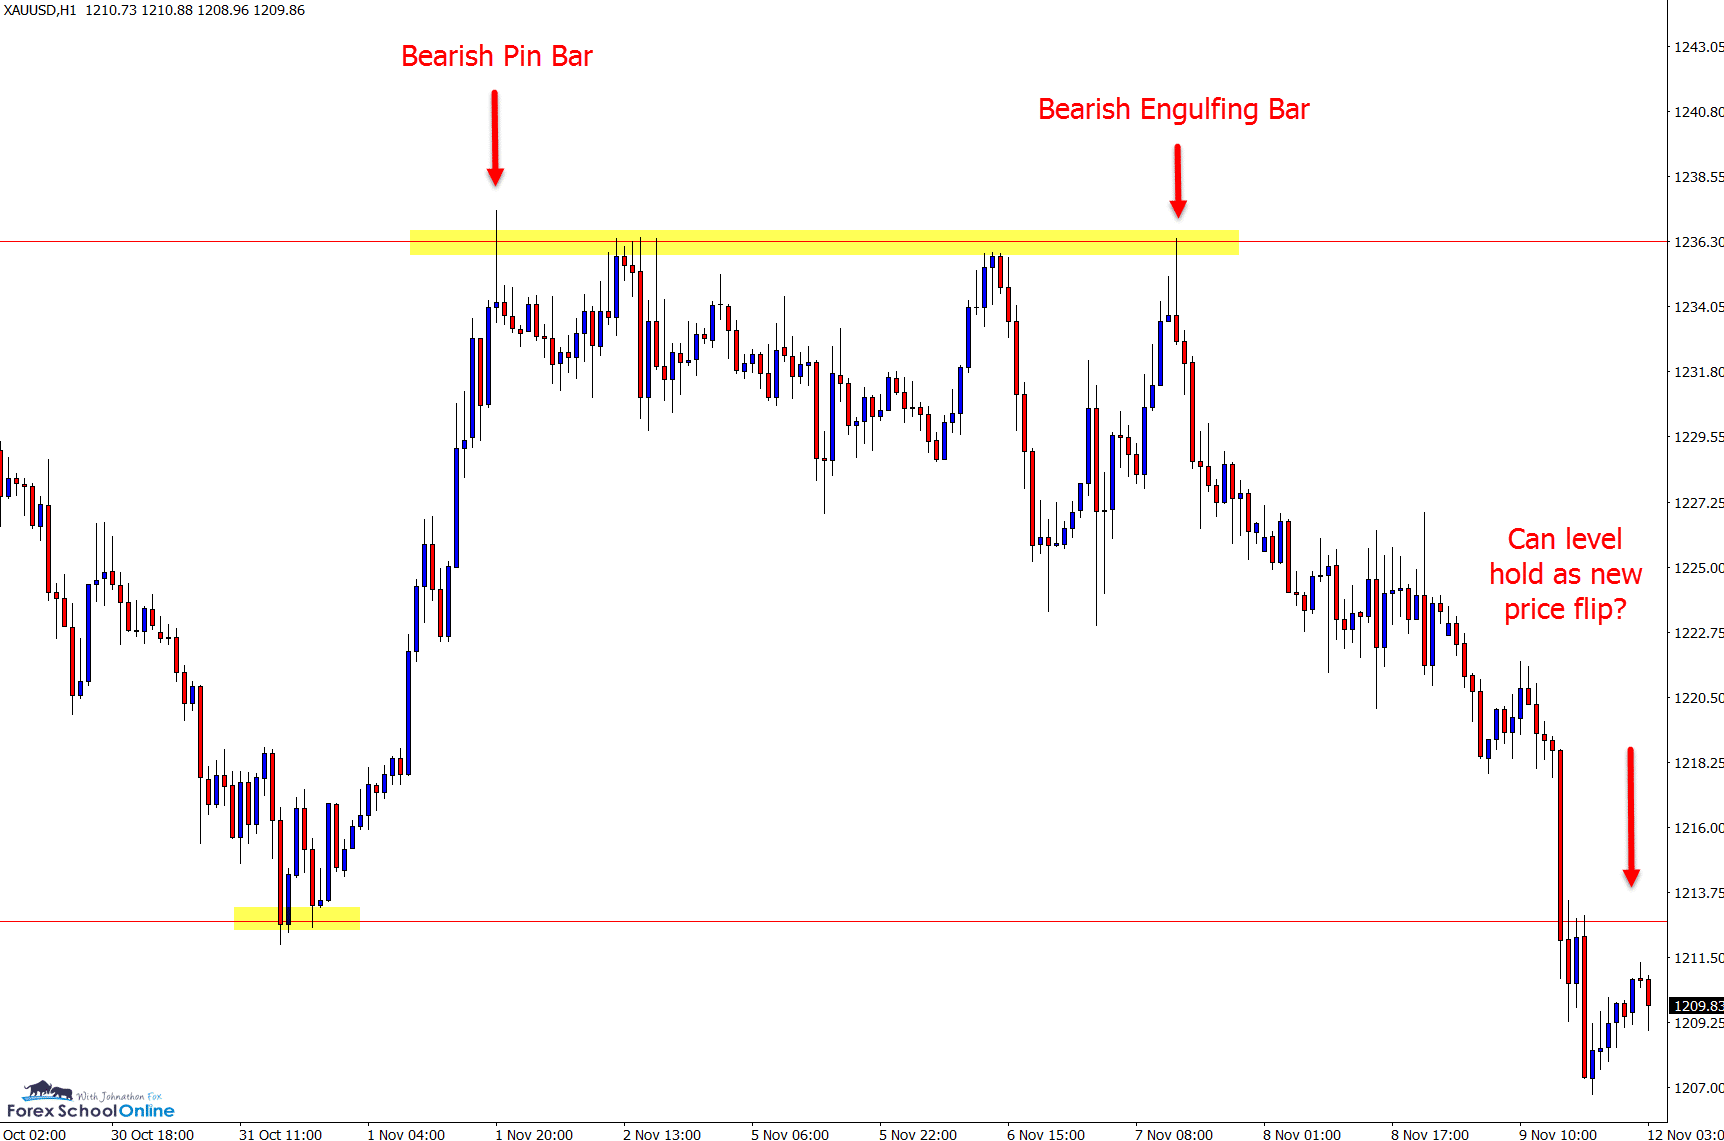 gold 1 hour price action trading chart